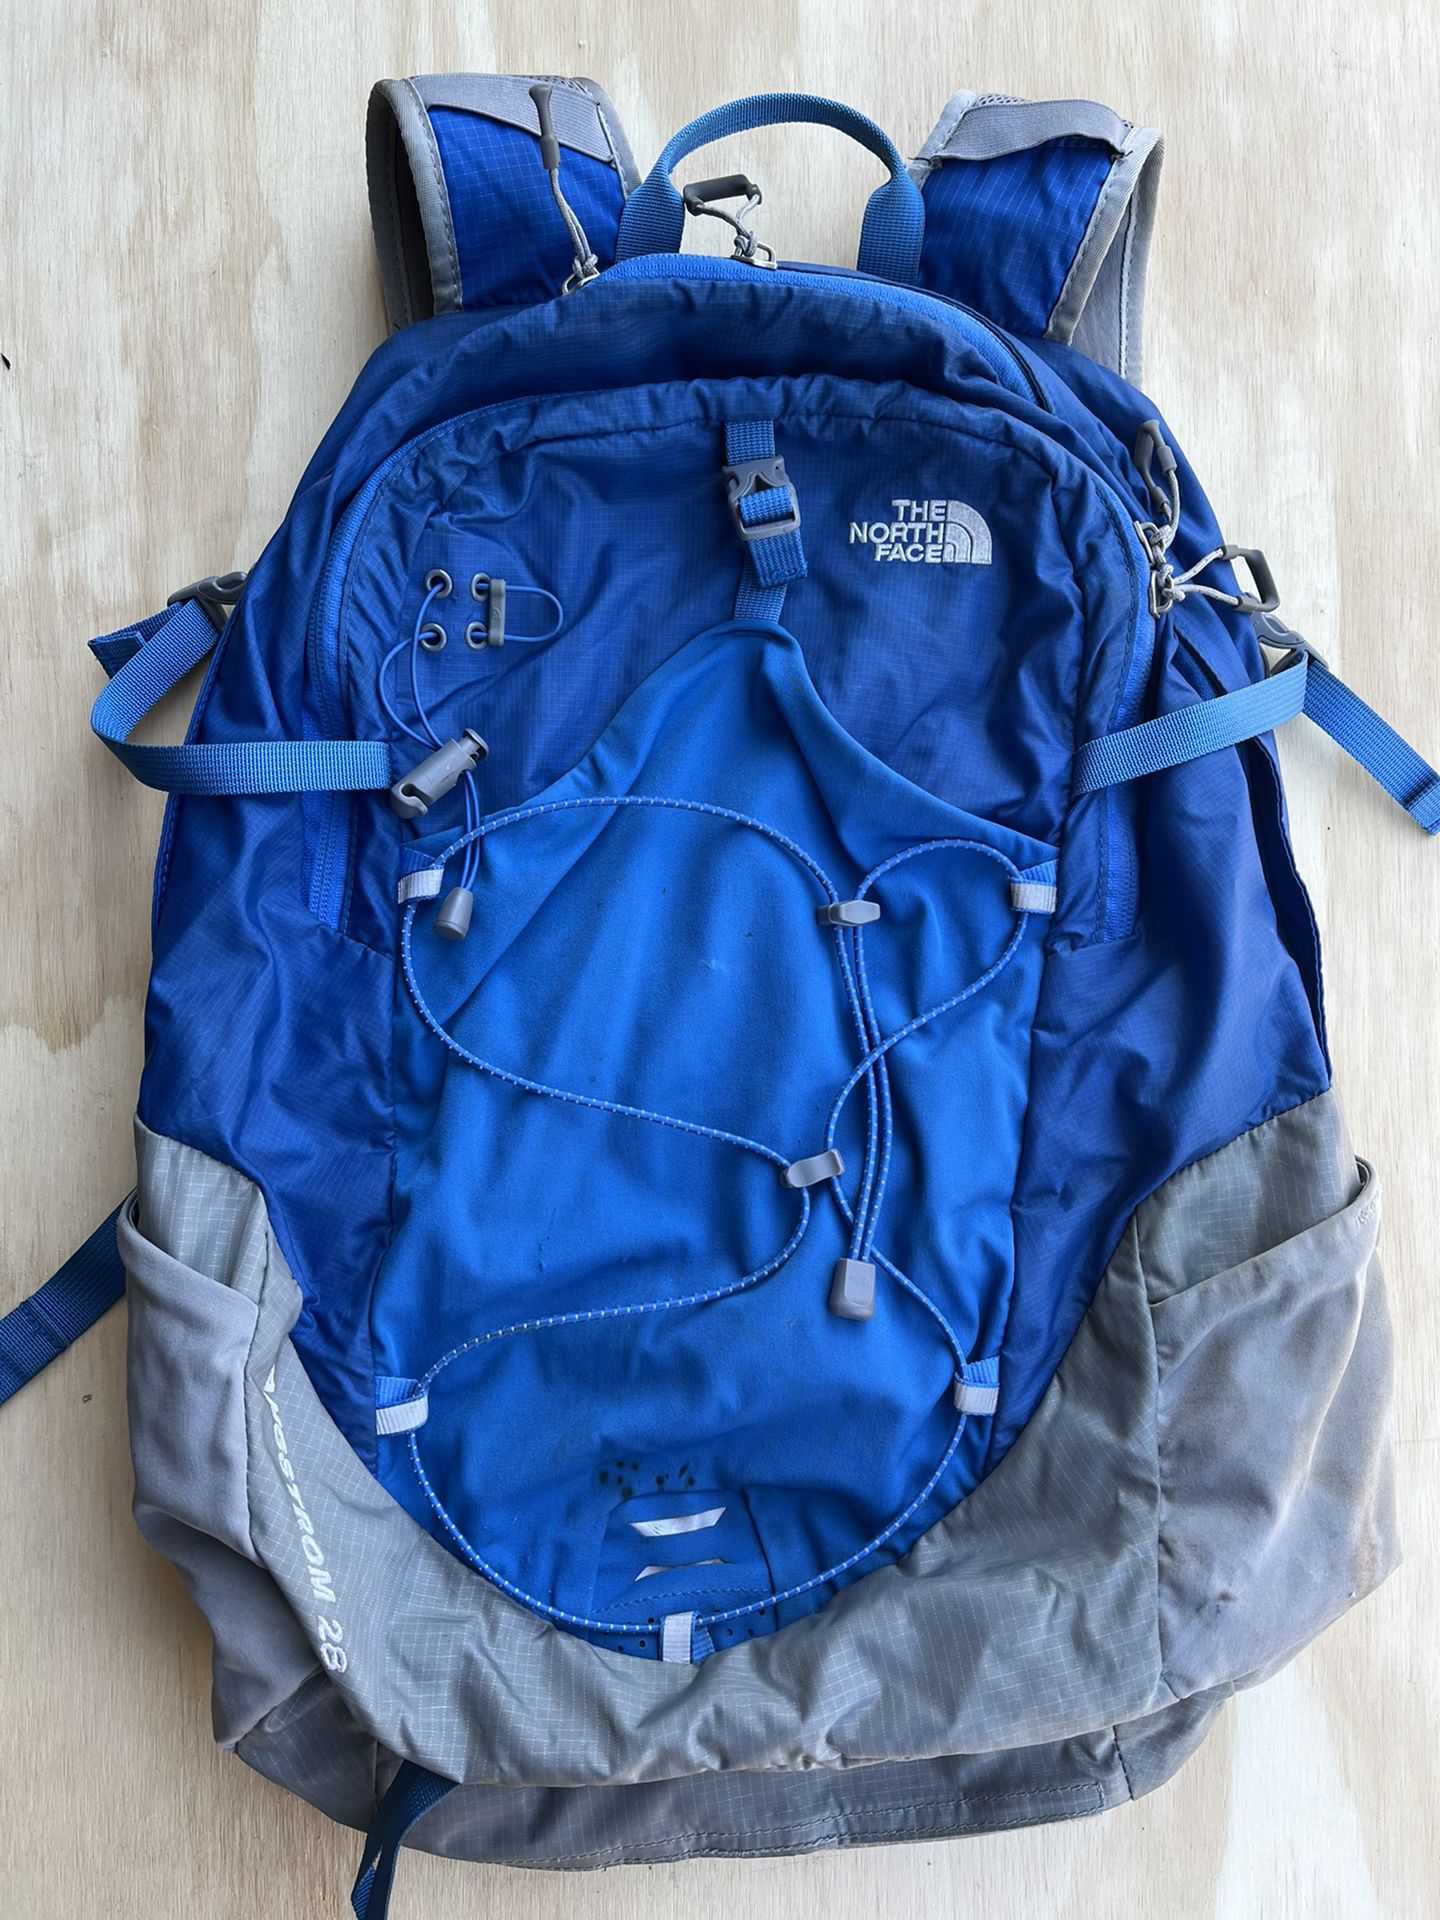 North Face Amgstrom 28 Hiking Pack